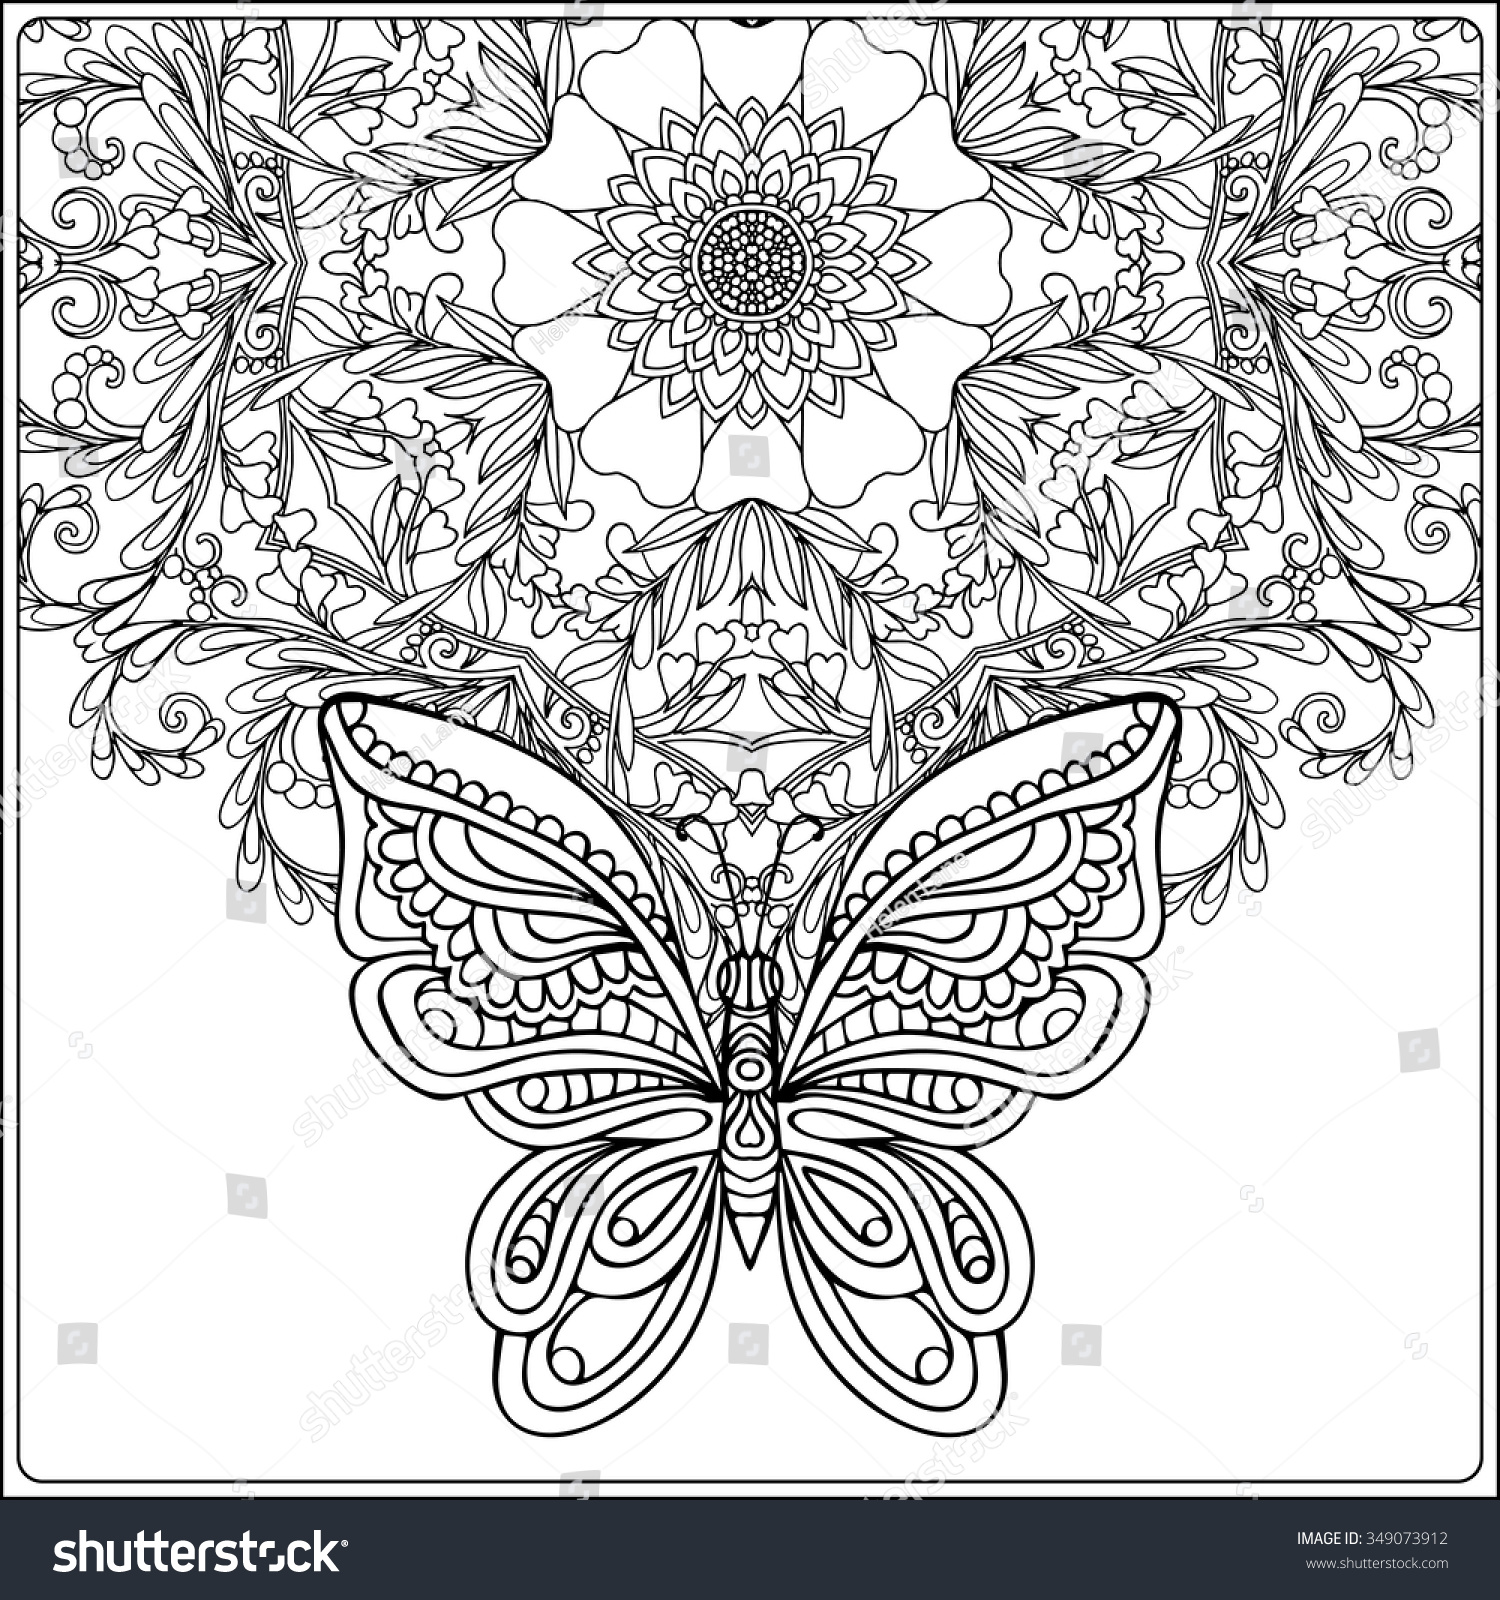 Butterfly Floral Mandala Coloring Book Adult Stock Vector Royalty ...